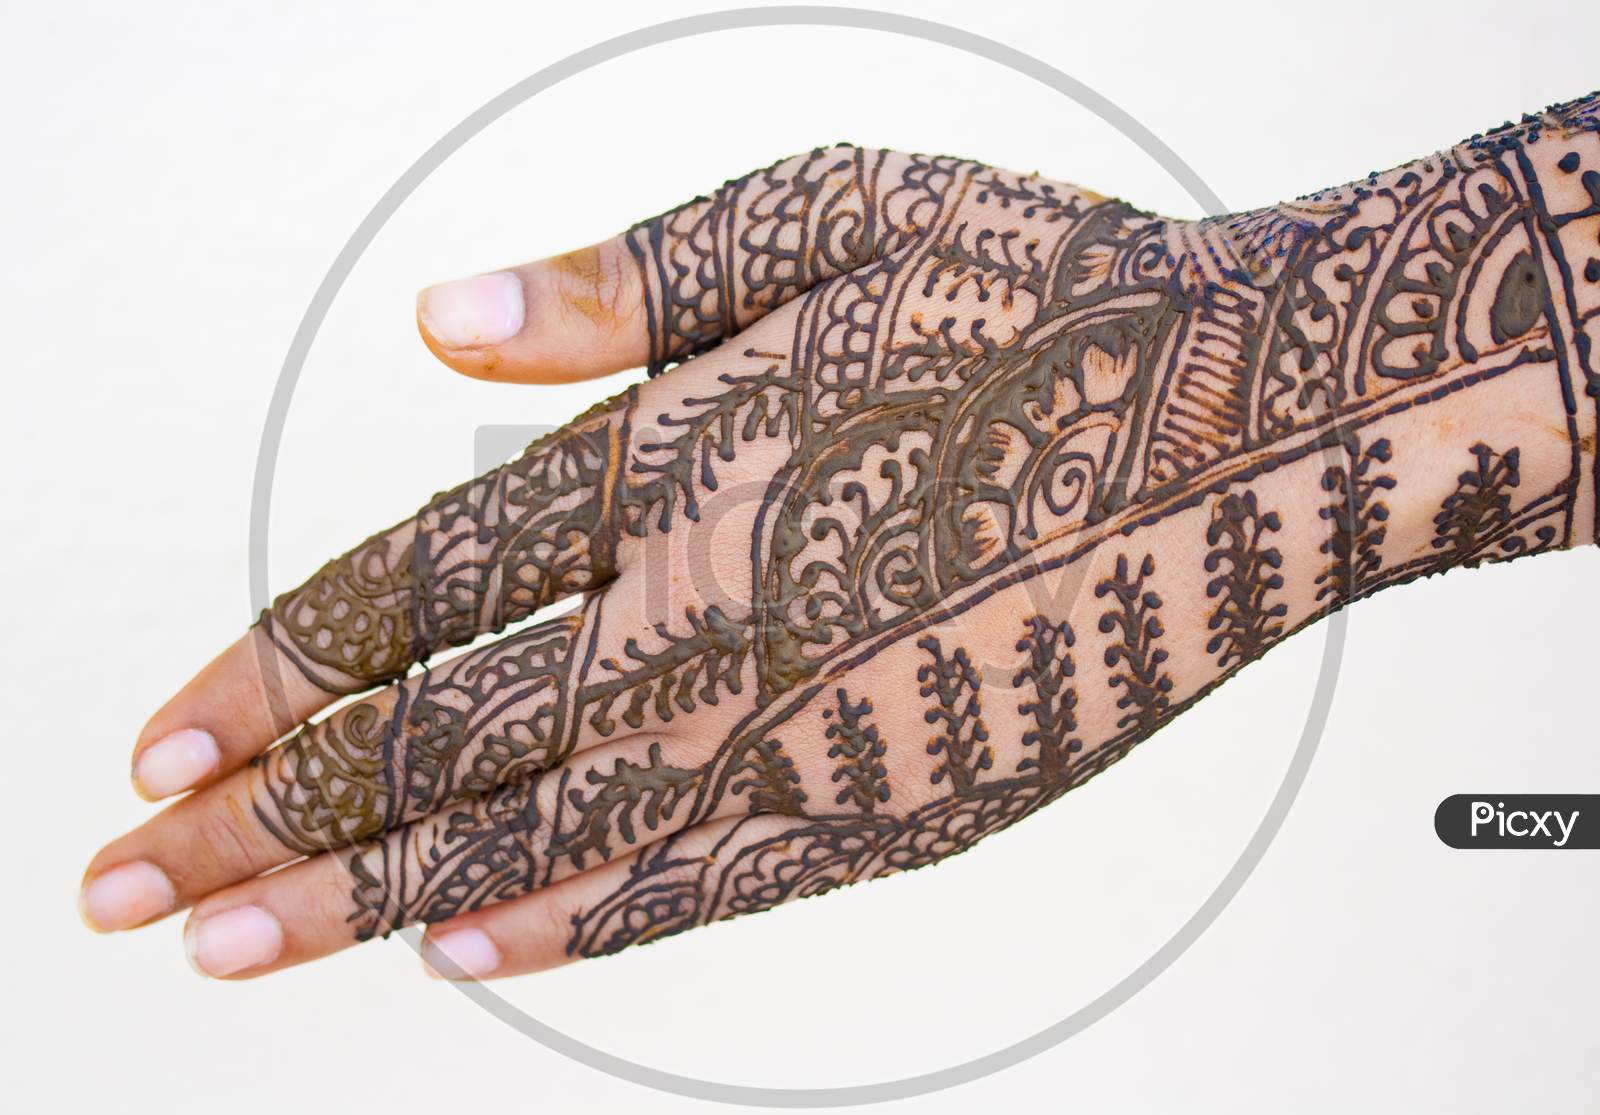 Beautiful Artwork Drawn On The Hand With Mehndi.